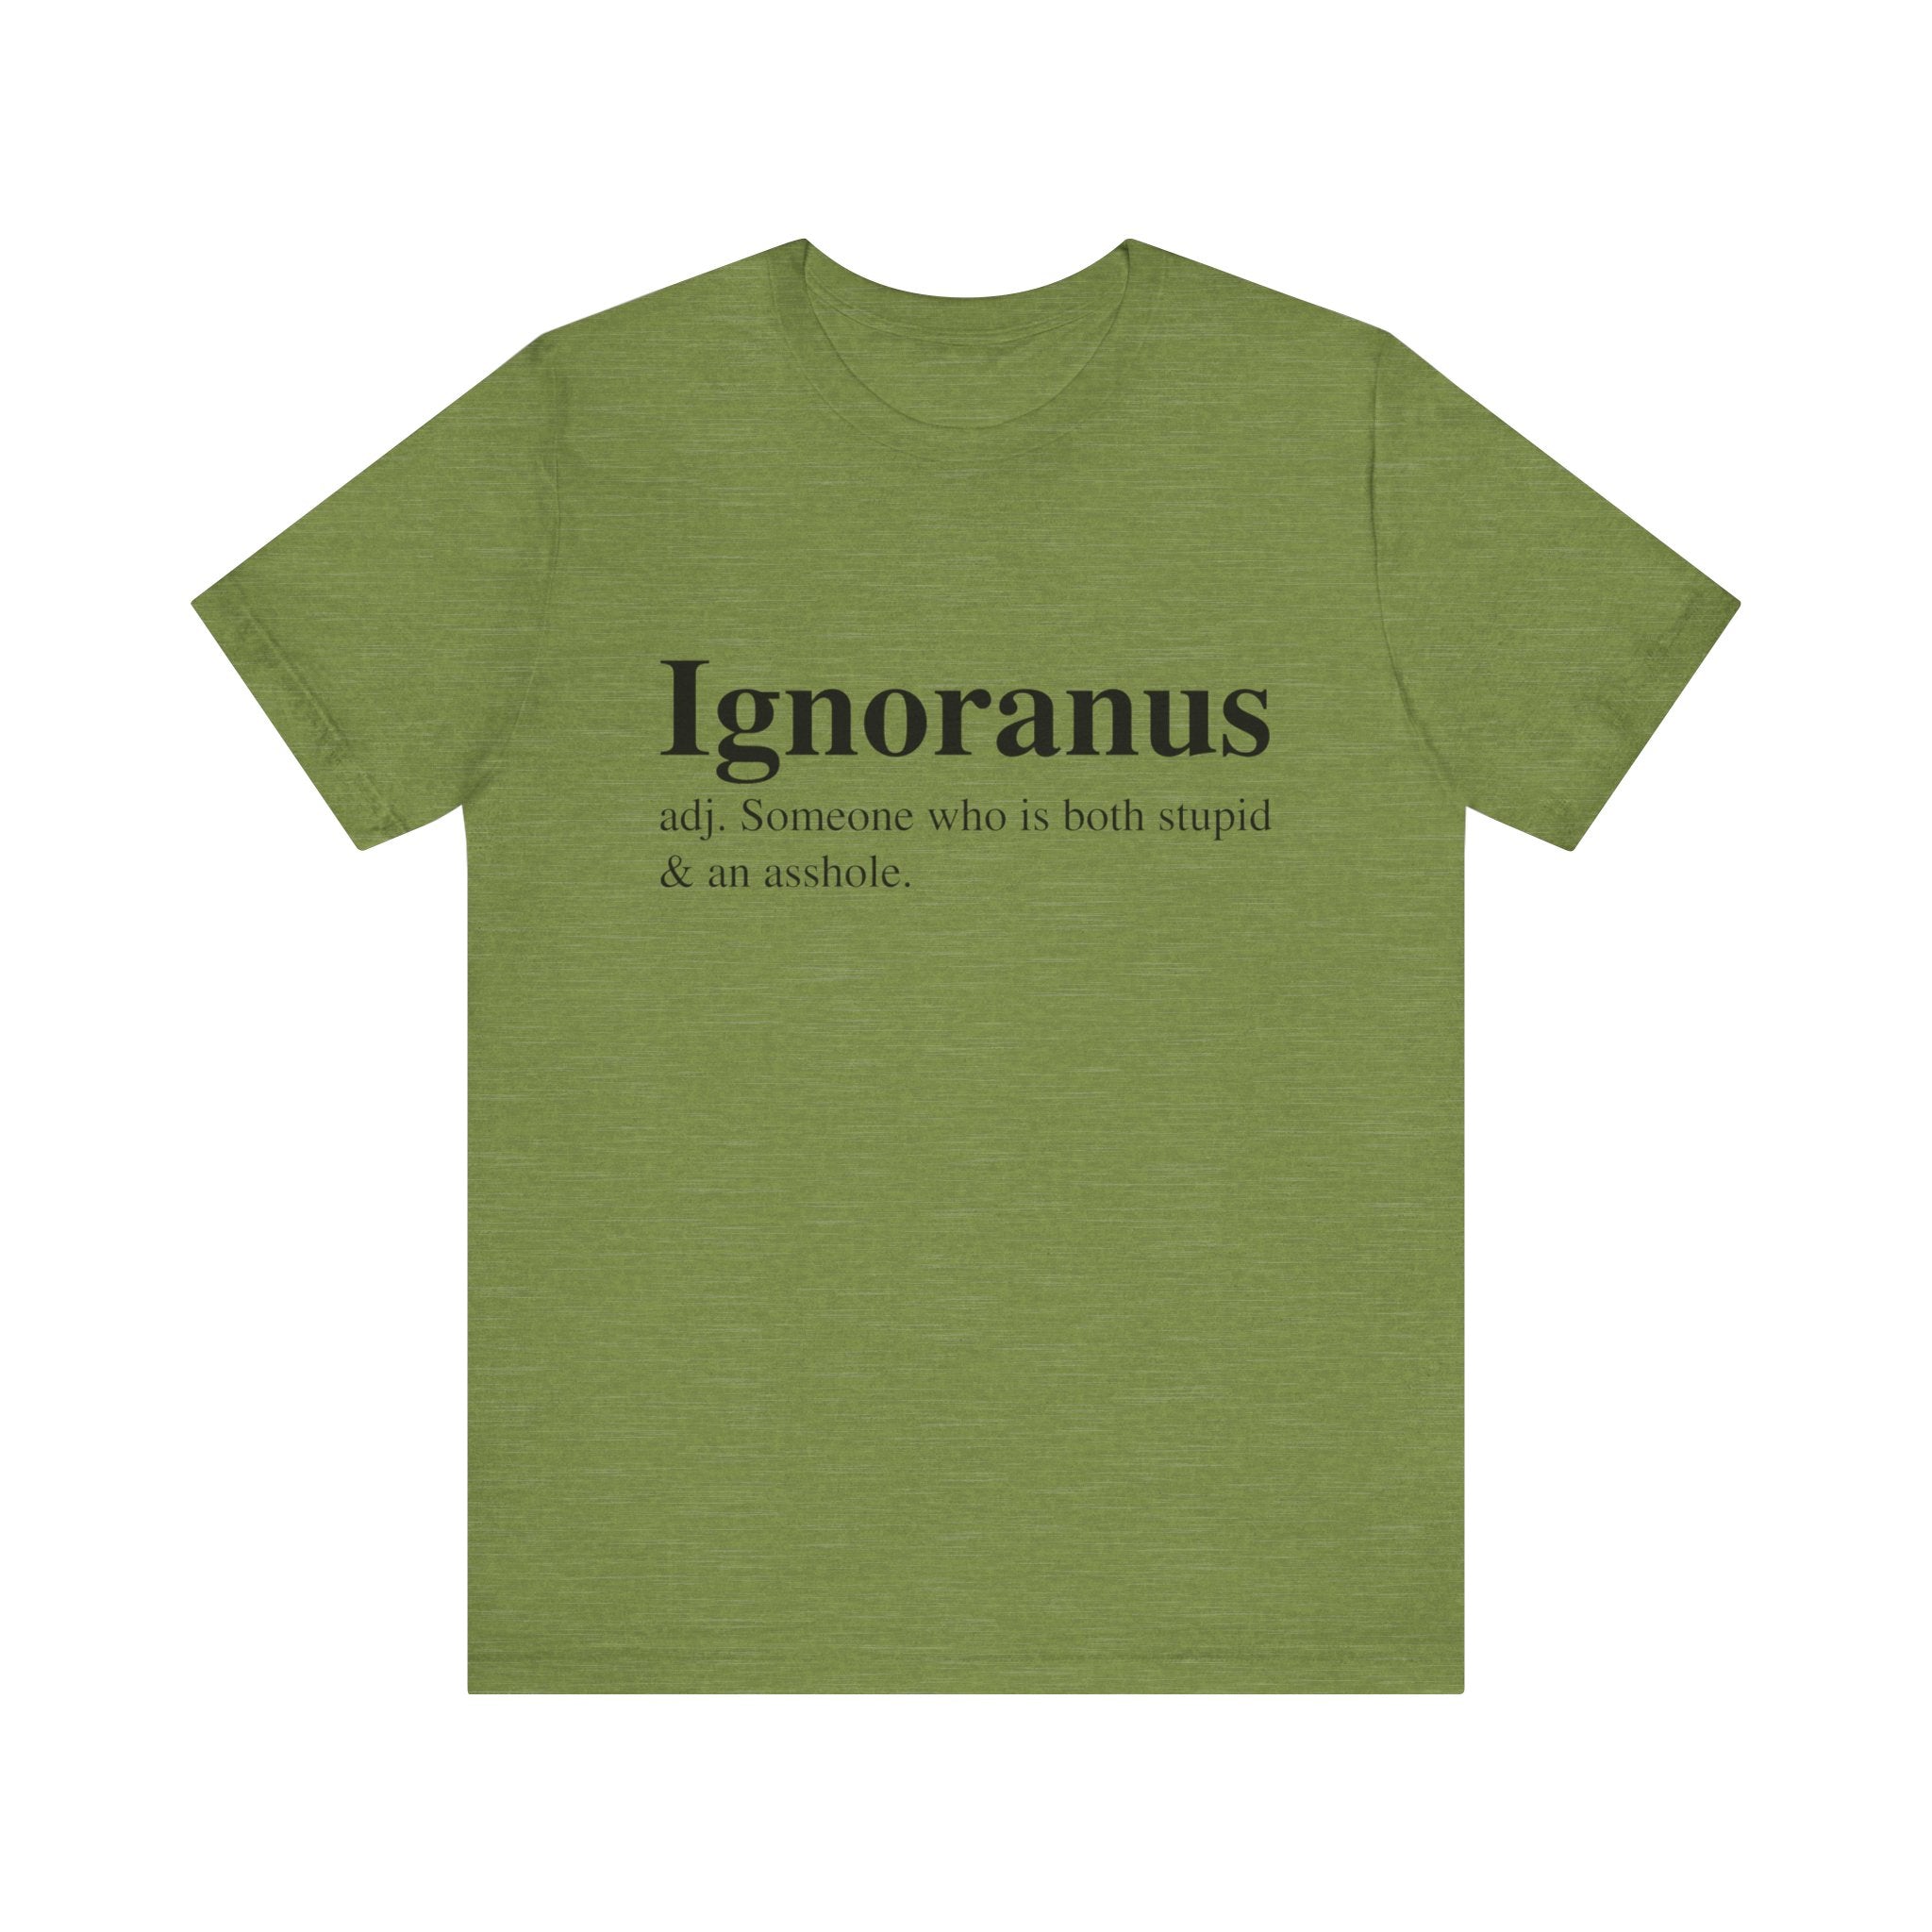 Green unisex Ignoranus T-Shirt with the word "ignoranus" and its definition printed in black text on the front.